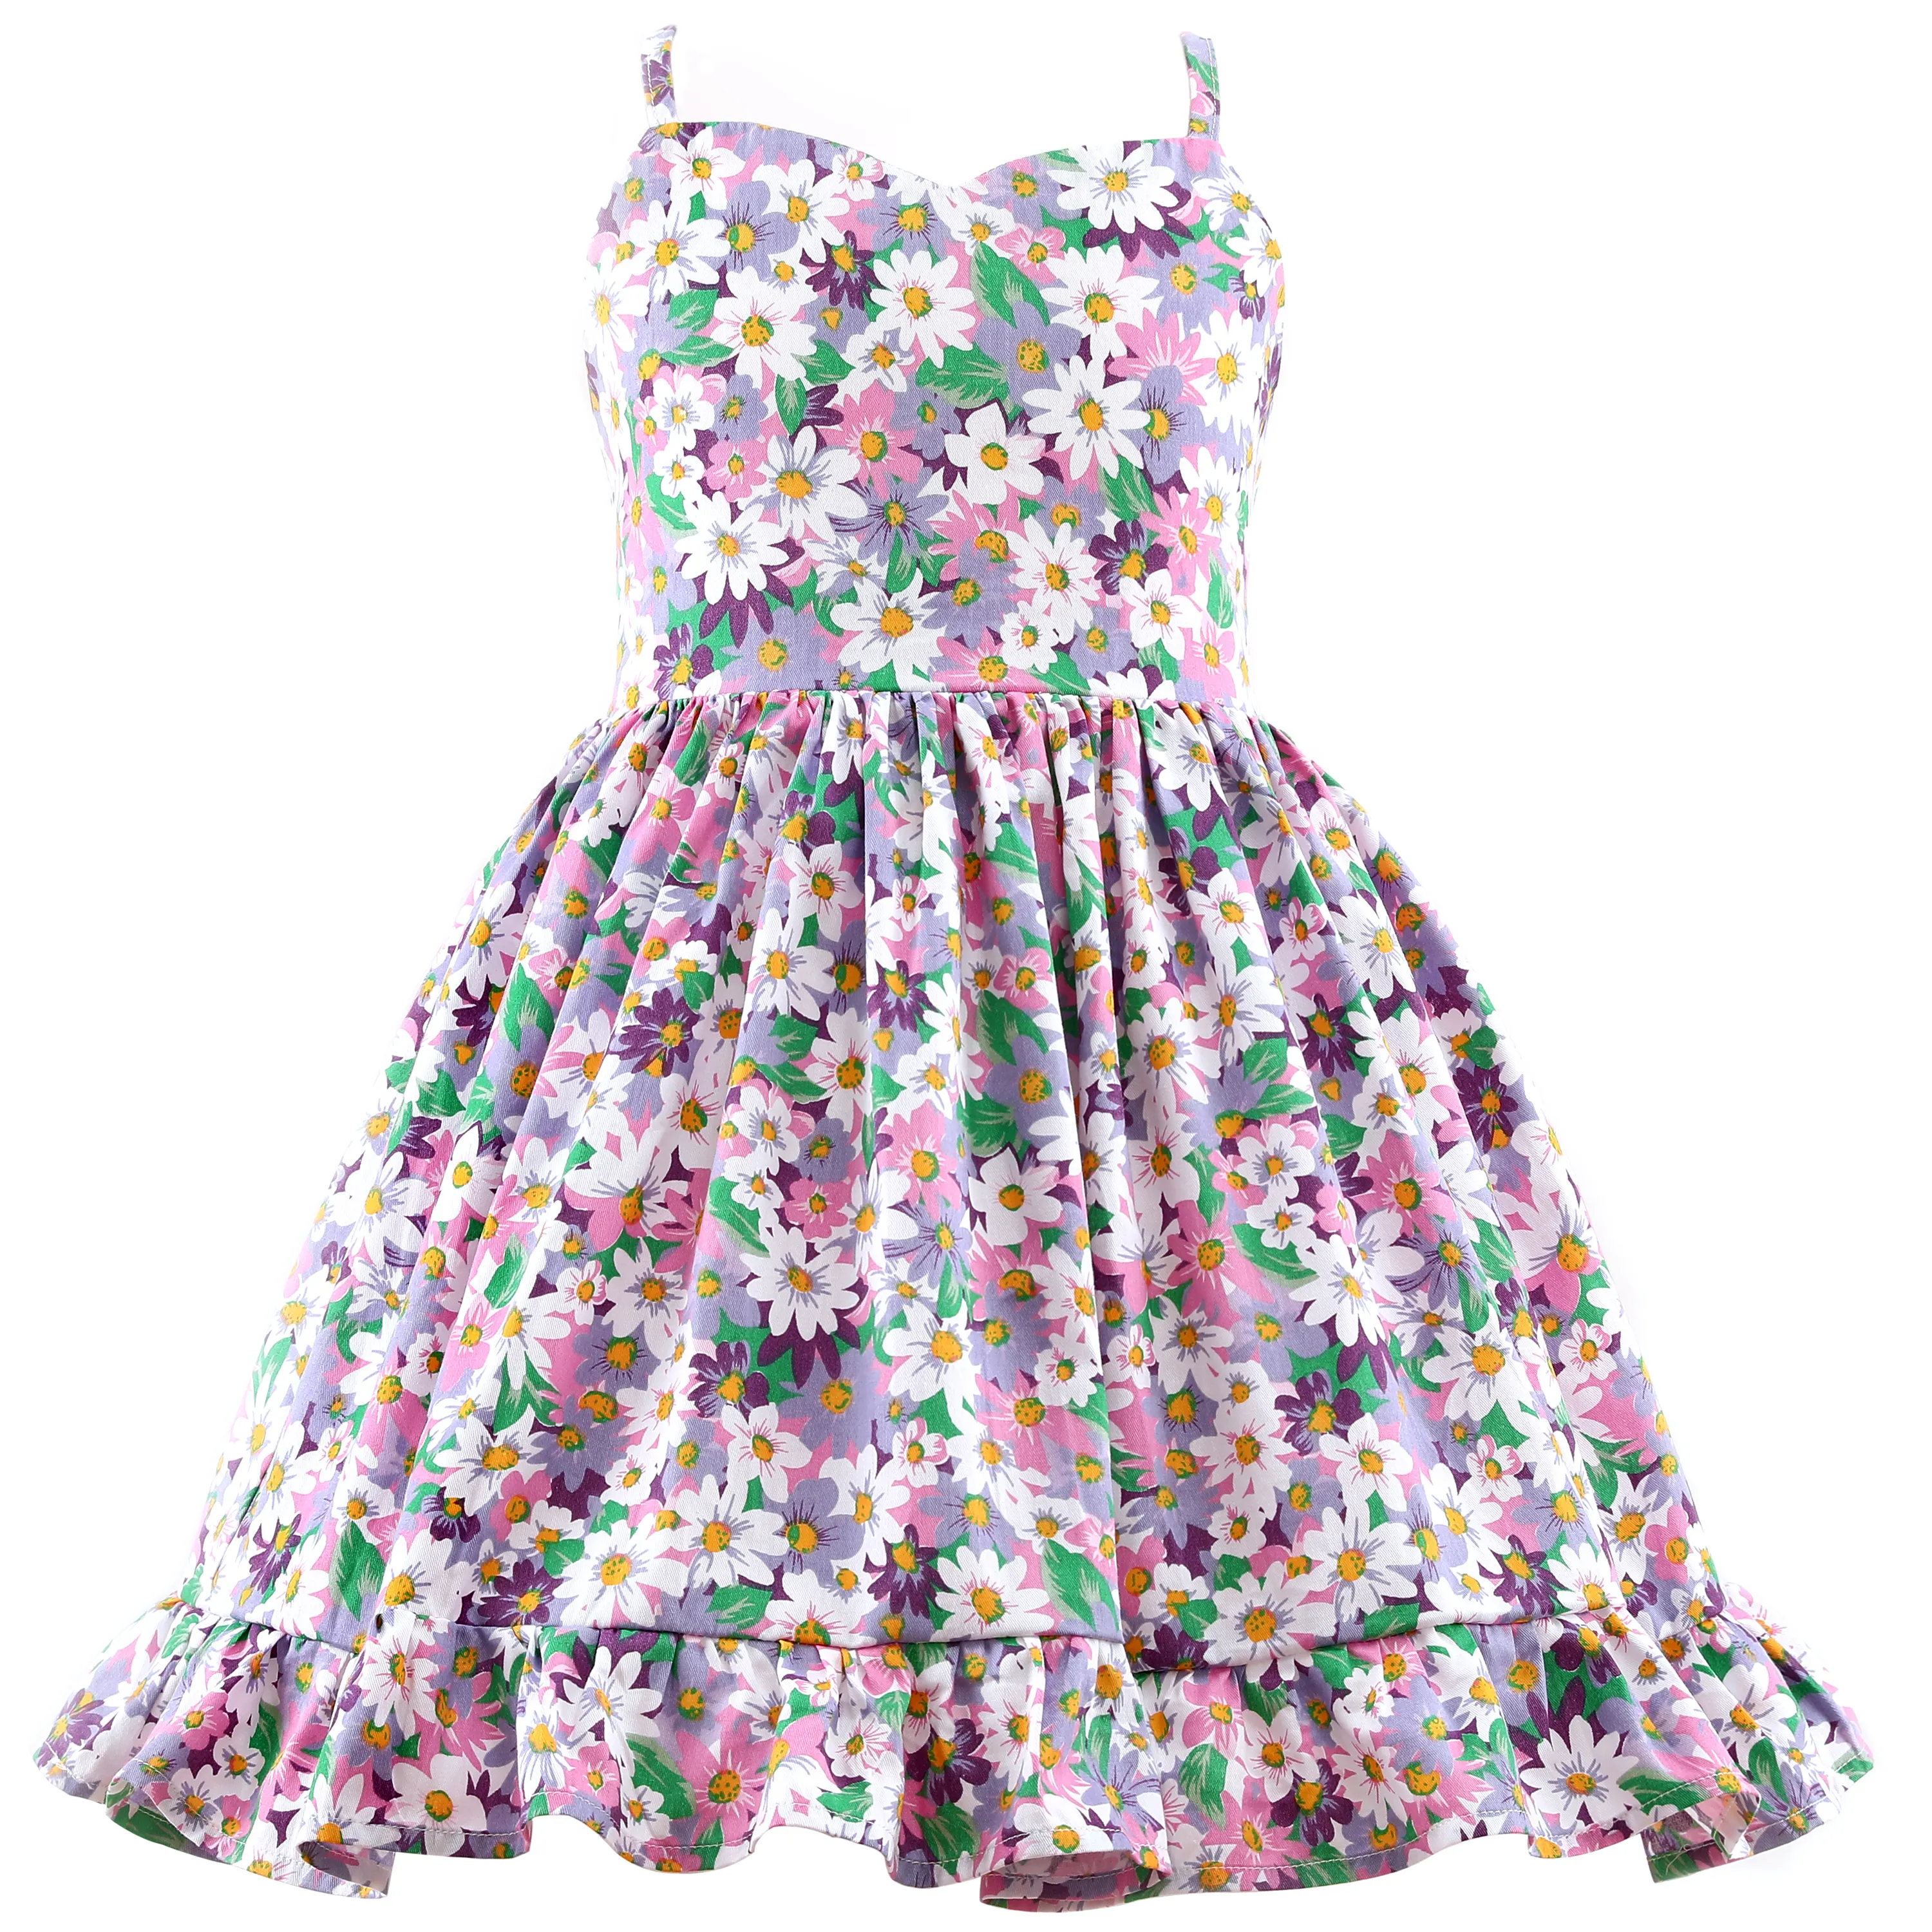 Floral girls dress cotton backless baby dresses adjustable sling dress casual Children clothes for 1-10 years old